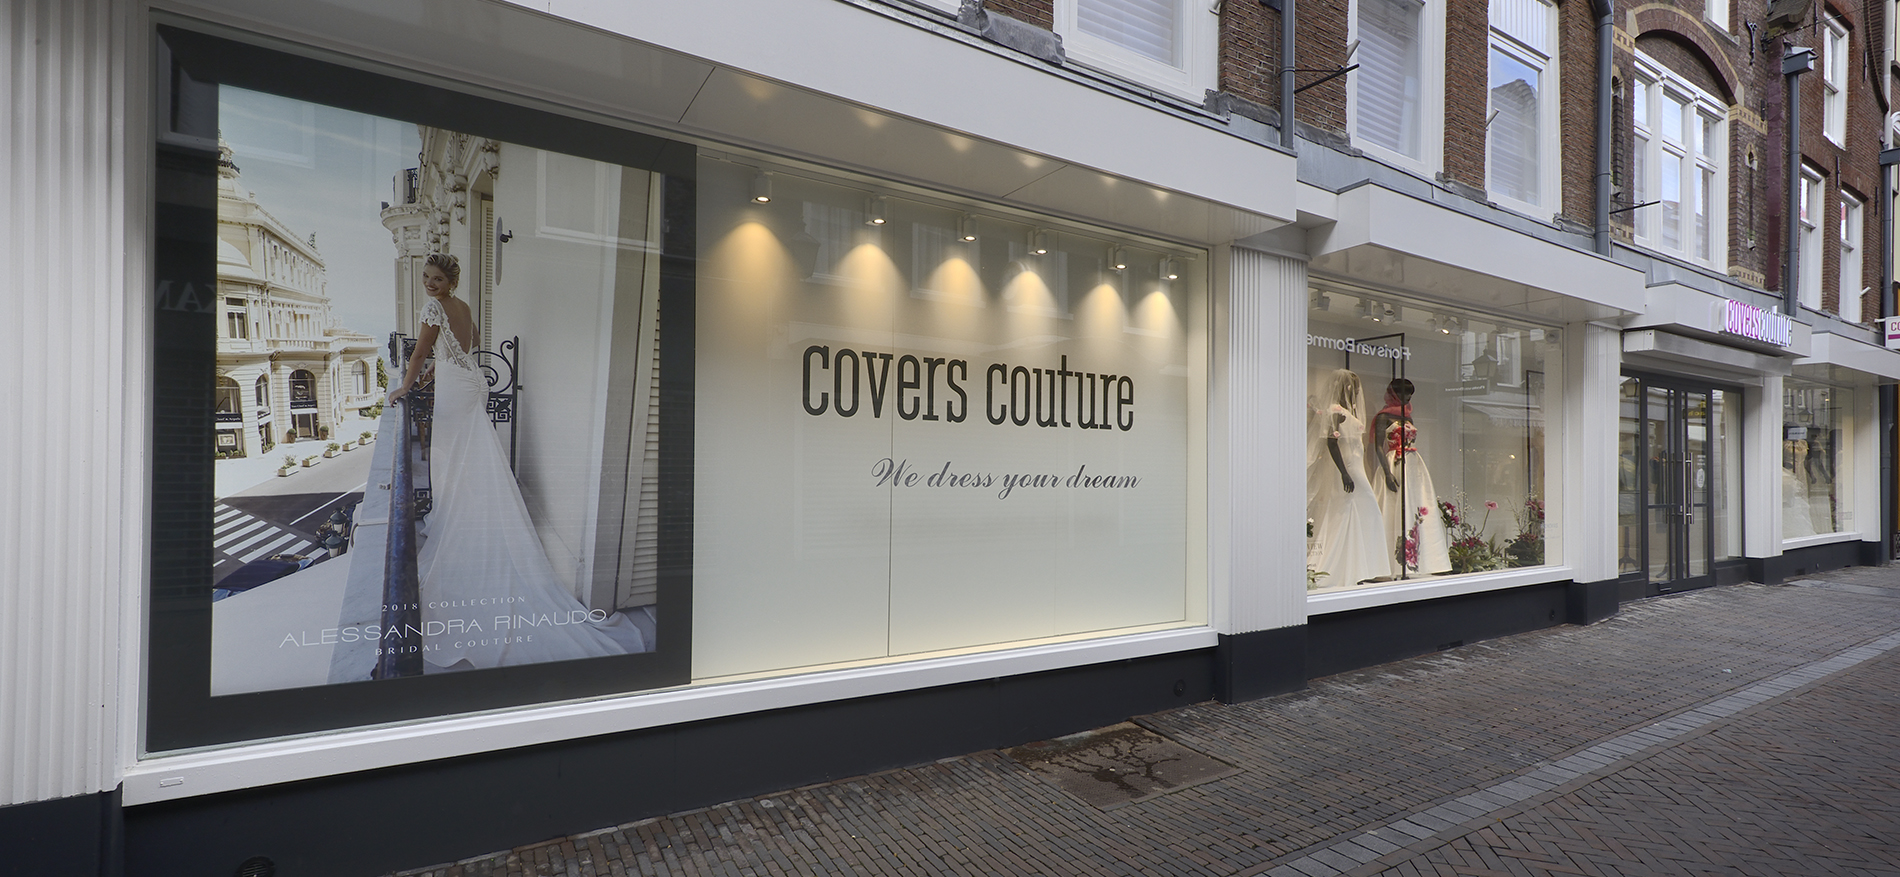 Covers Couture Bruidsmode | Utrecht - Mode